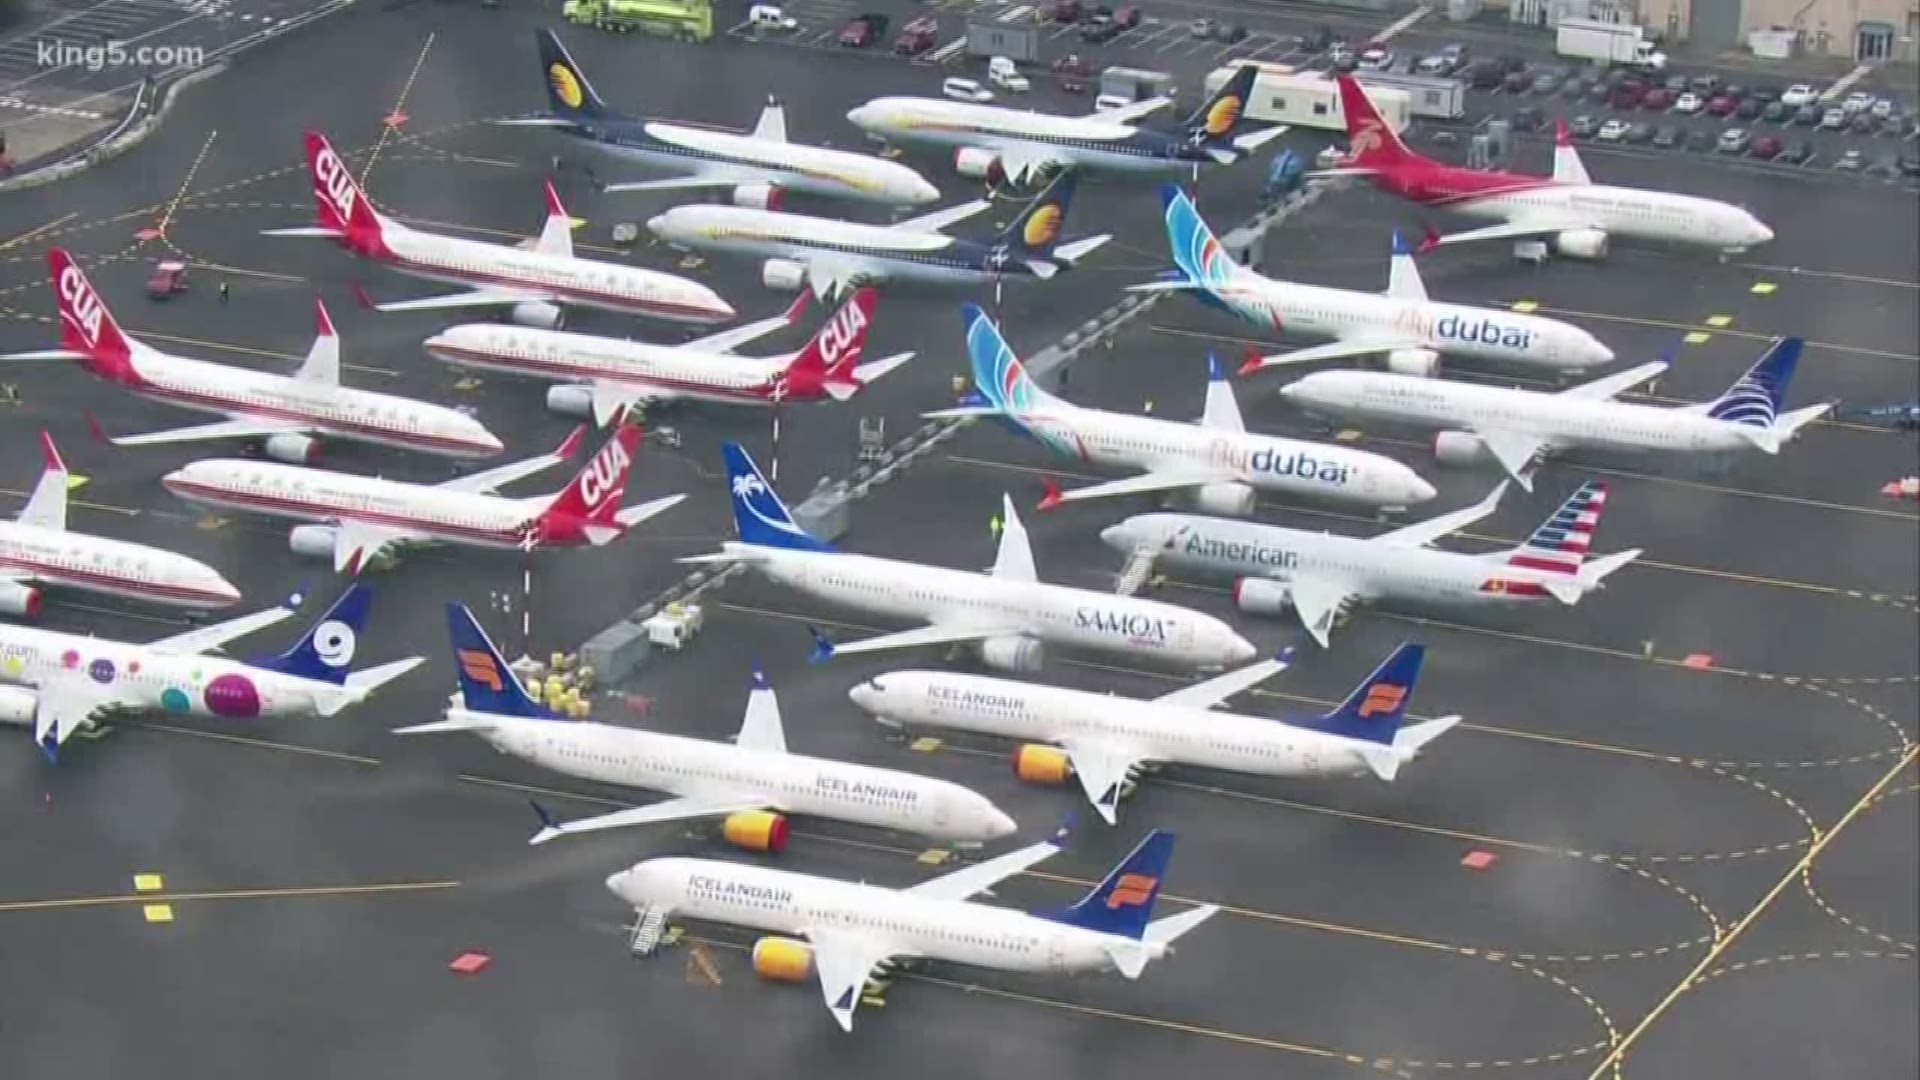 All Boeing 737s are built in Renton, but now they're piling up at the Puget Sound airfield. KING 5's Glenn Farley reports.